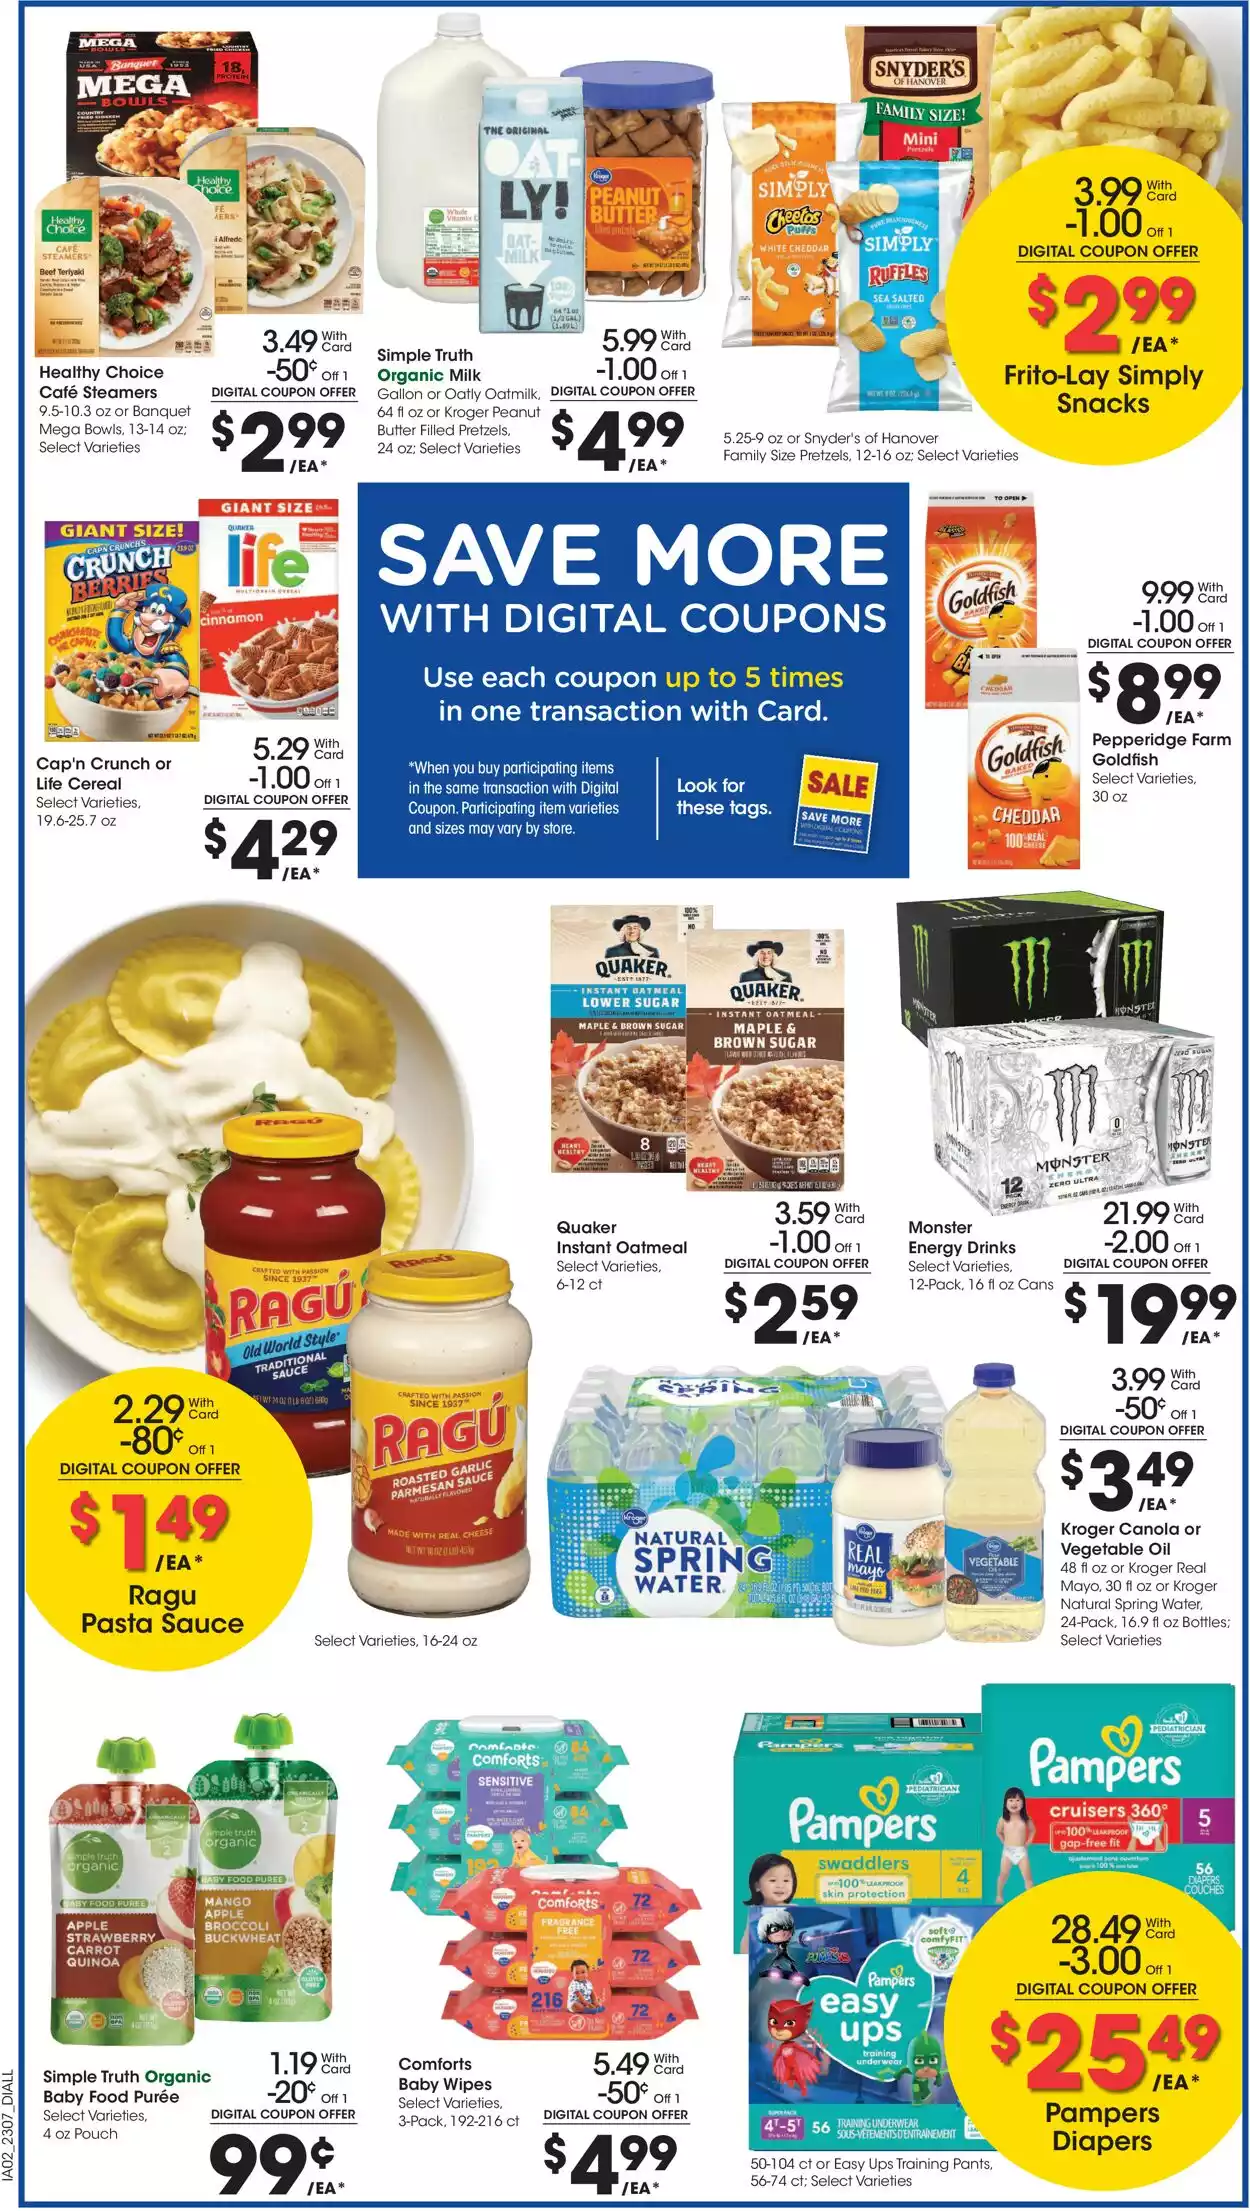 Baker’s Weekly ad Preview March 22 - 28, 2023 5